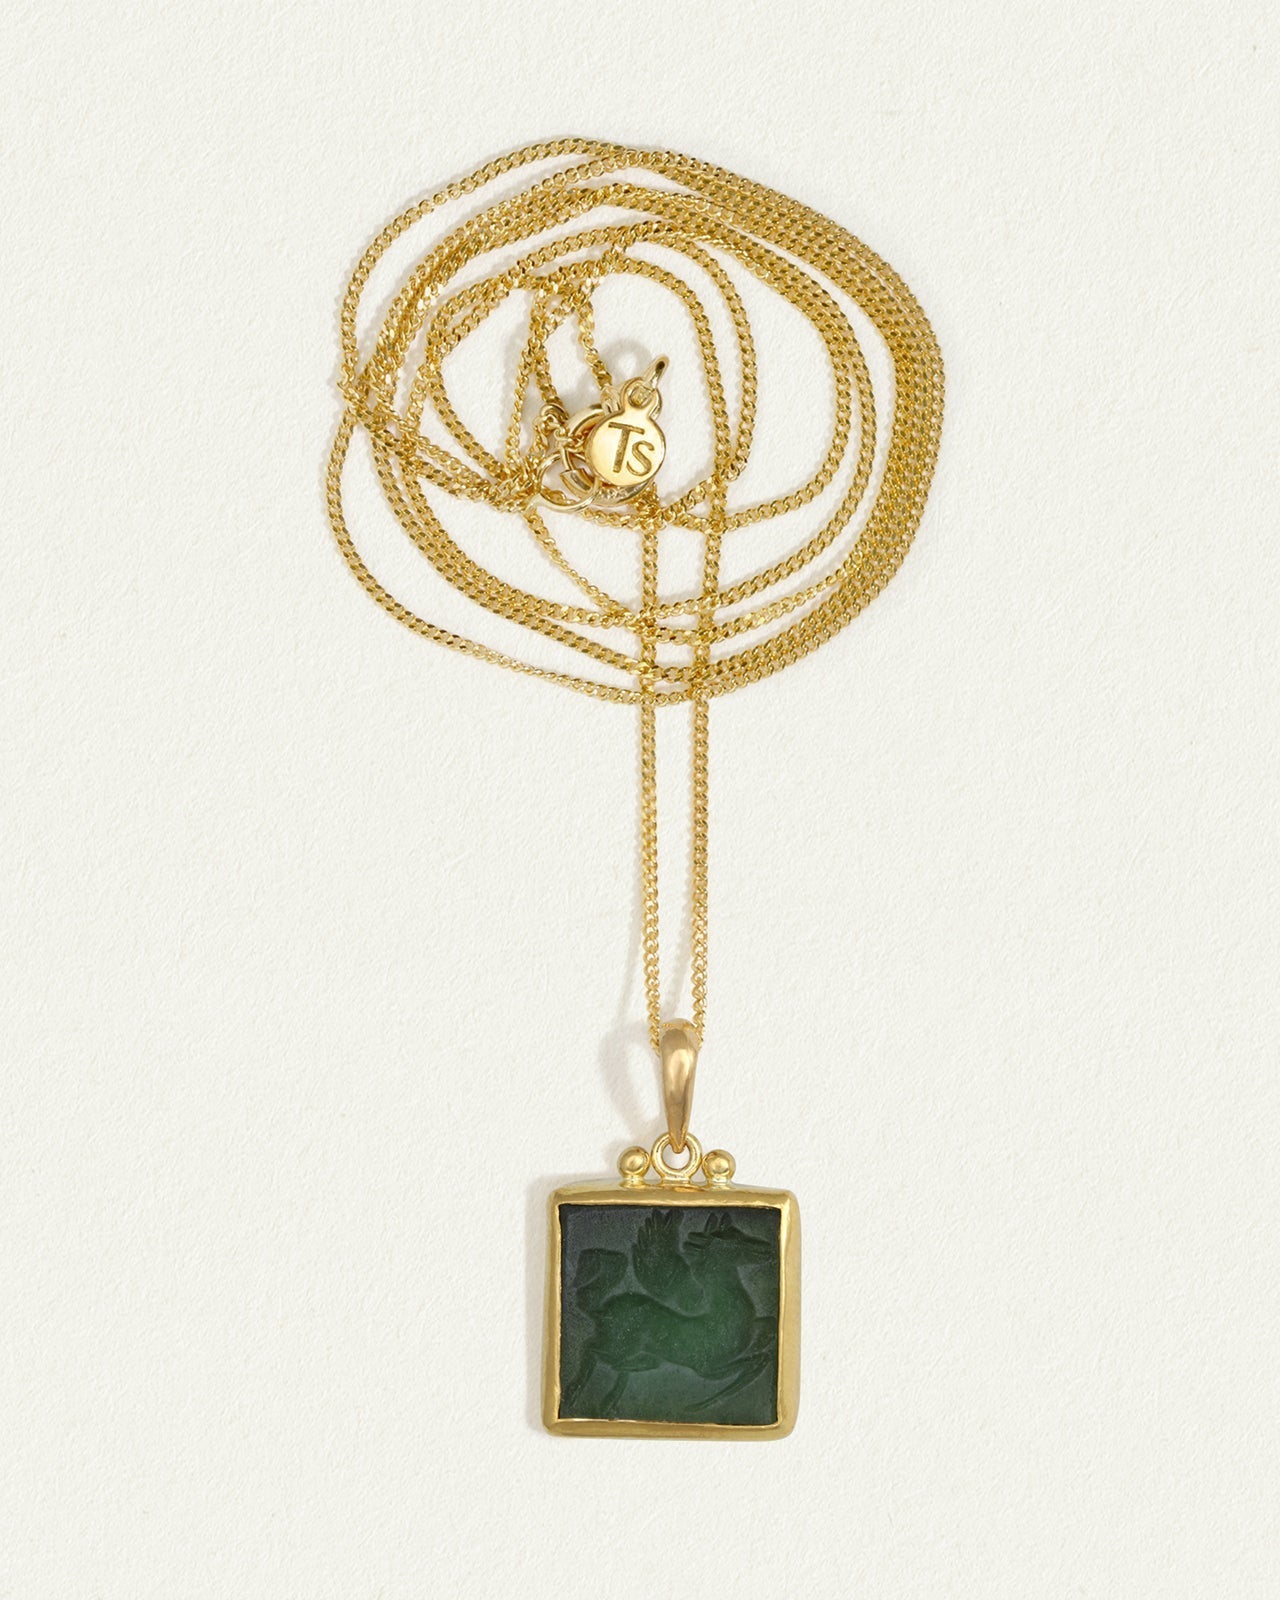 Anu Olive Pegasus Necklace Green Agate Solid Gold – Temple of the Sun